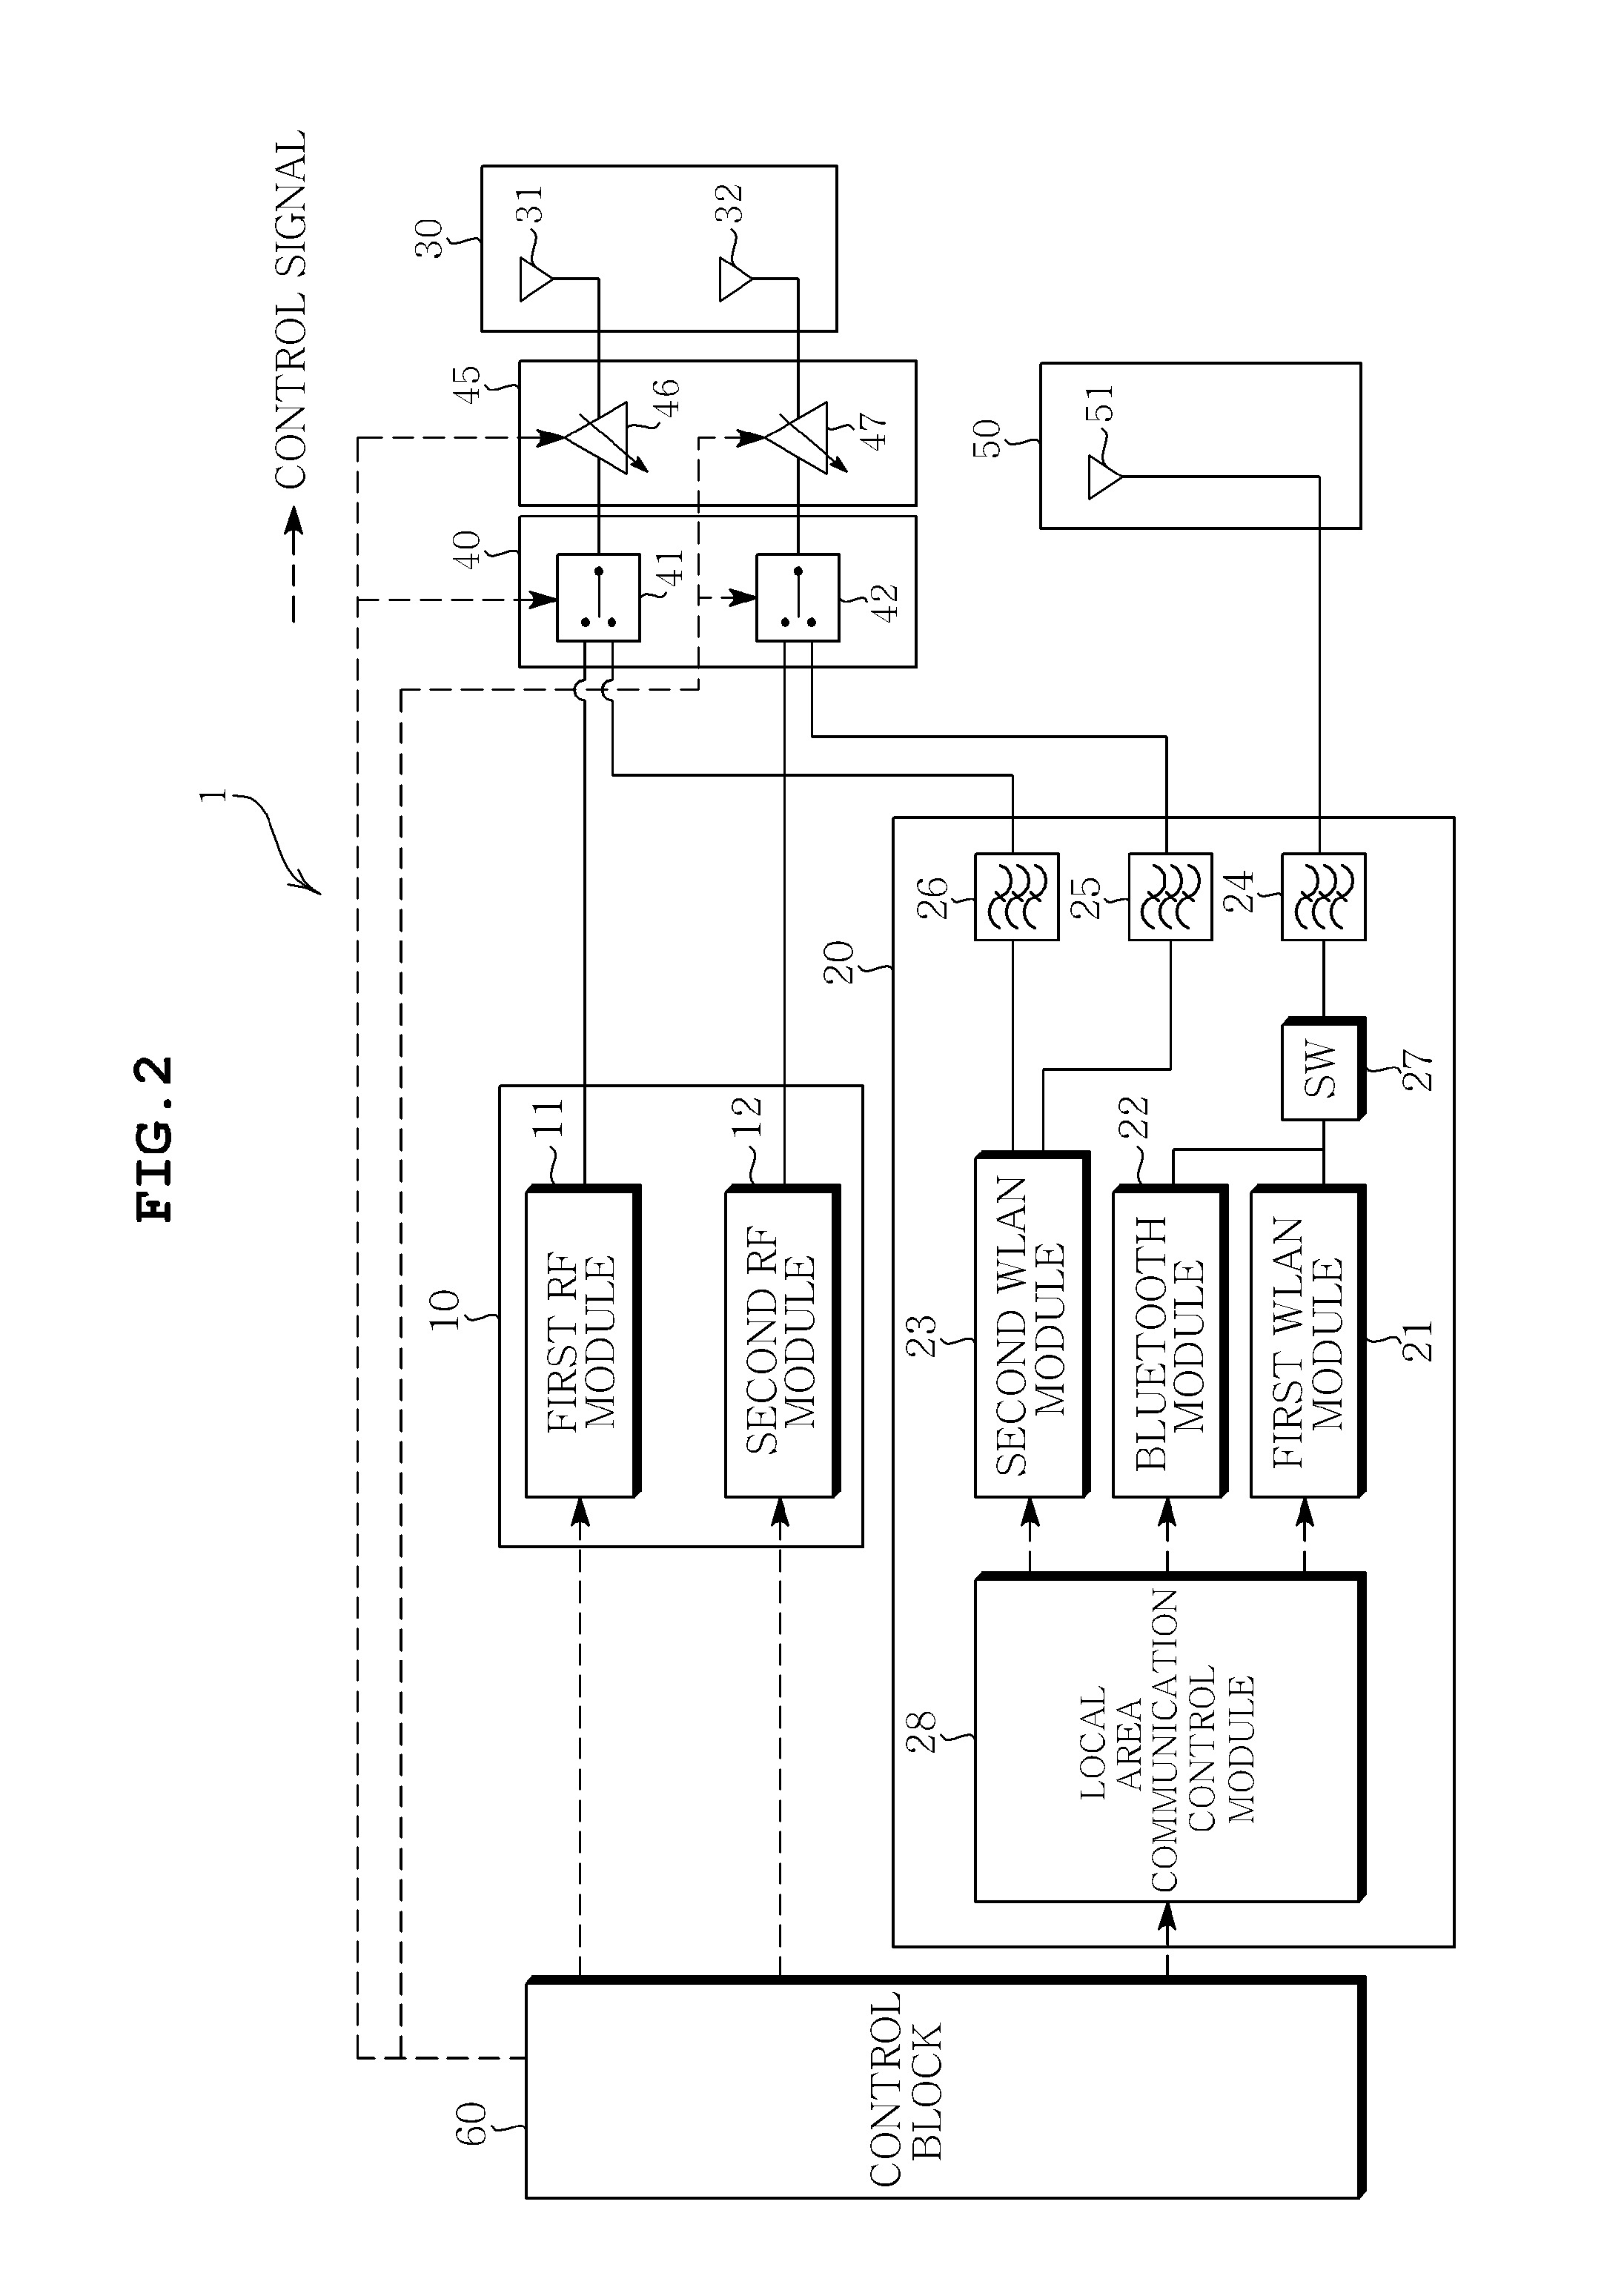 Multiple-input multiple-output wireless communication apparatus and method